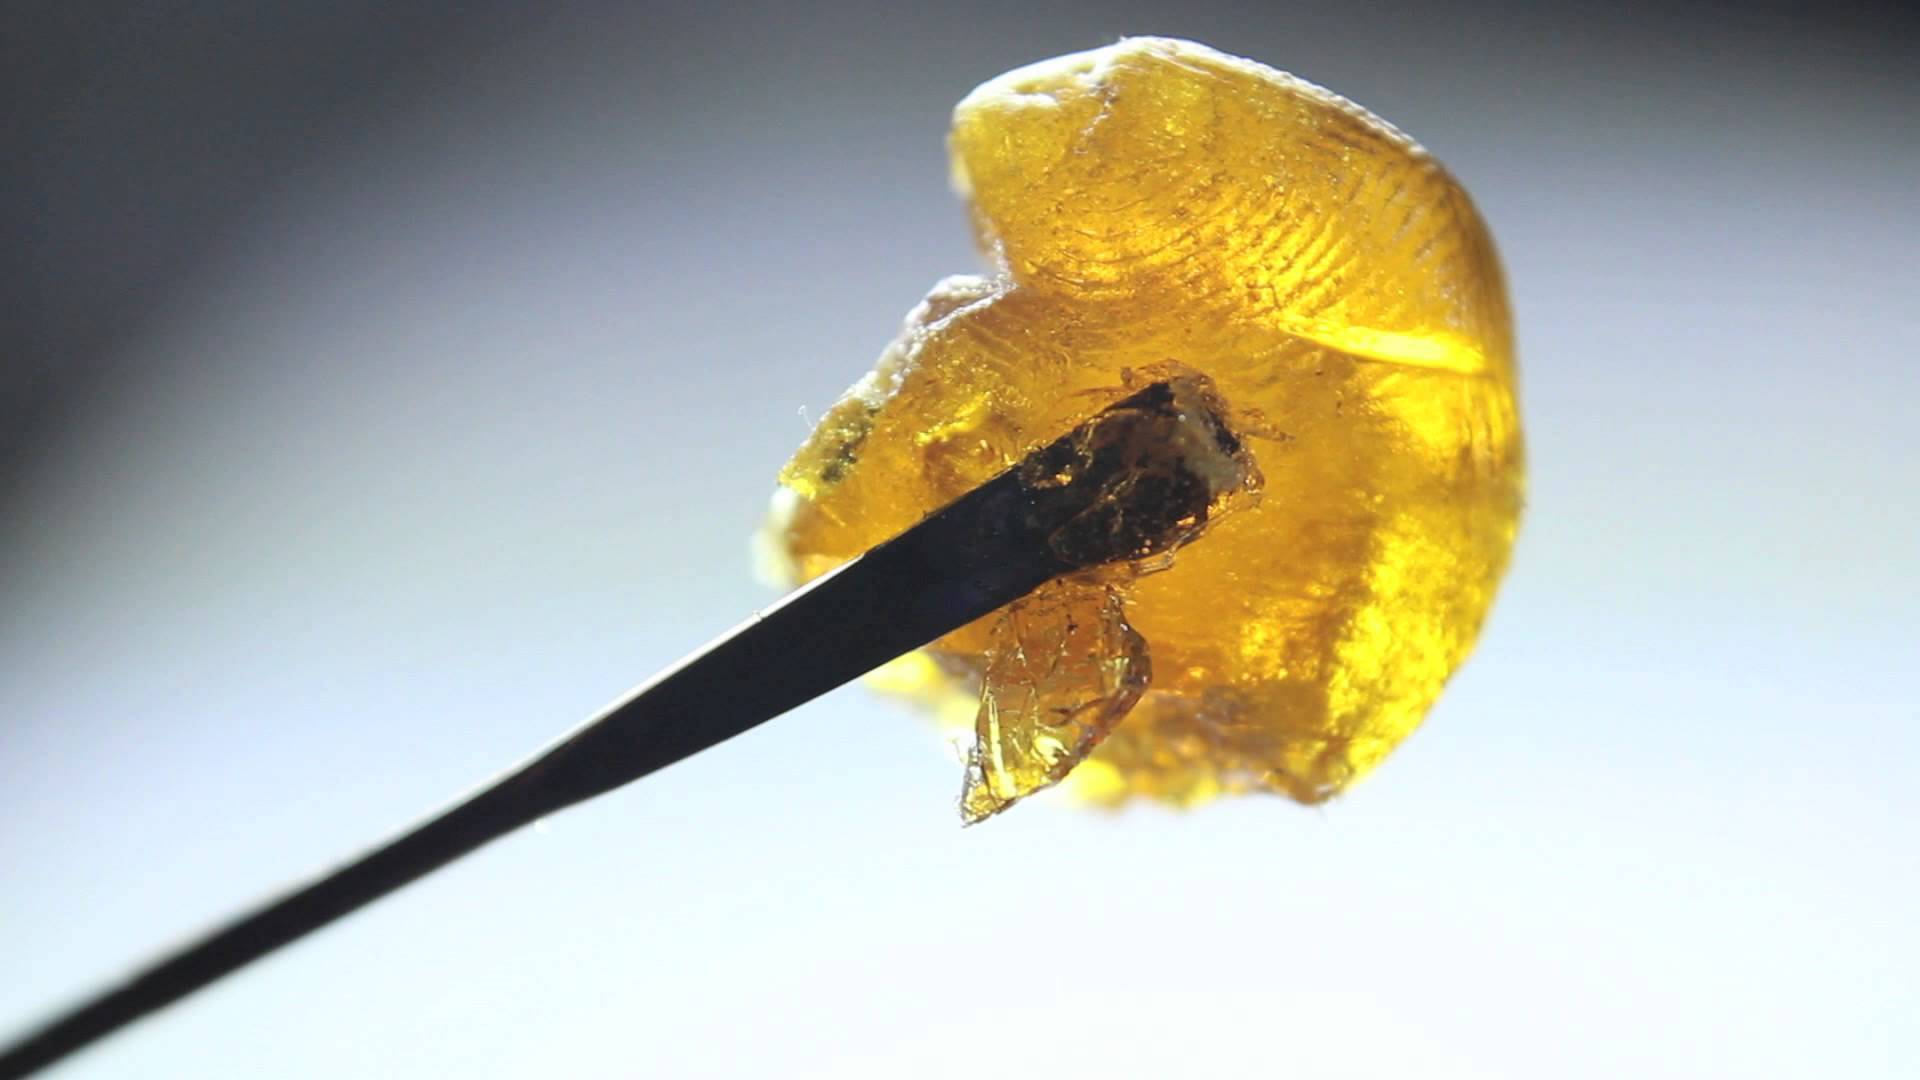 Dabbing: Where The Two Worlds of Recreational & Medicinal Cannabis Collide